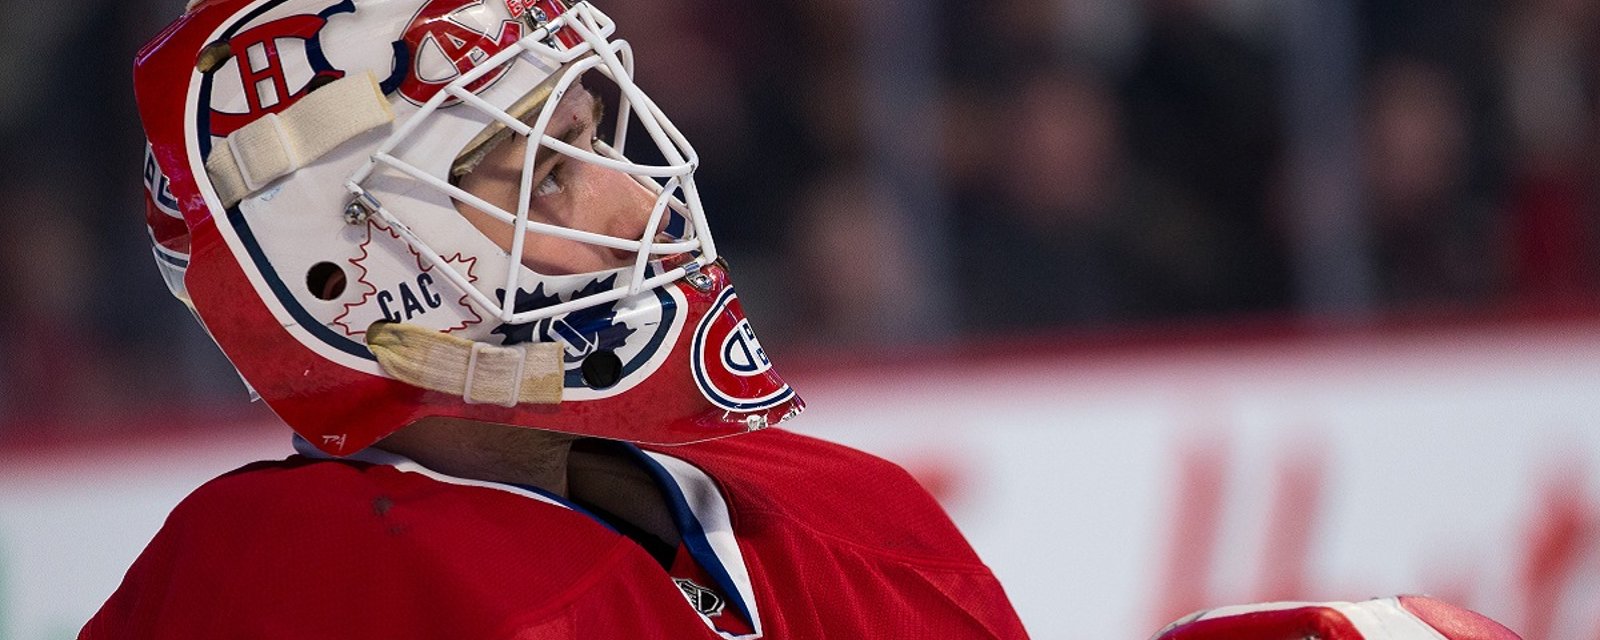 Ducks re-sign former Habs goalie to new deal after he plays just one game for them.